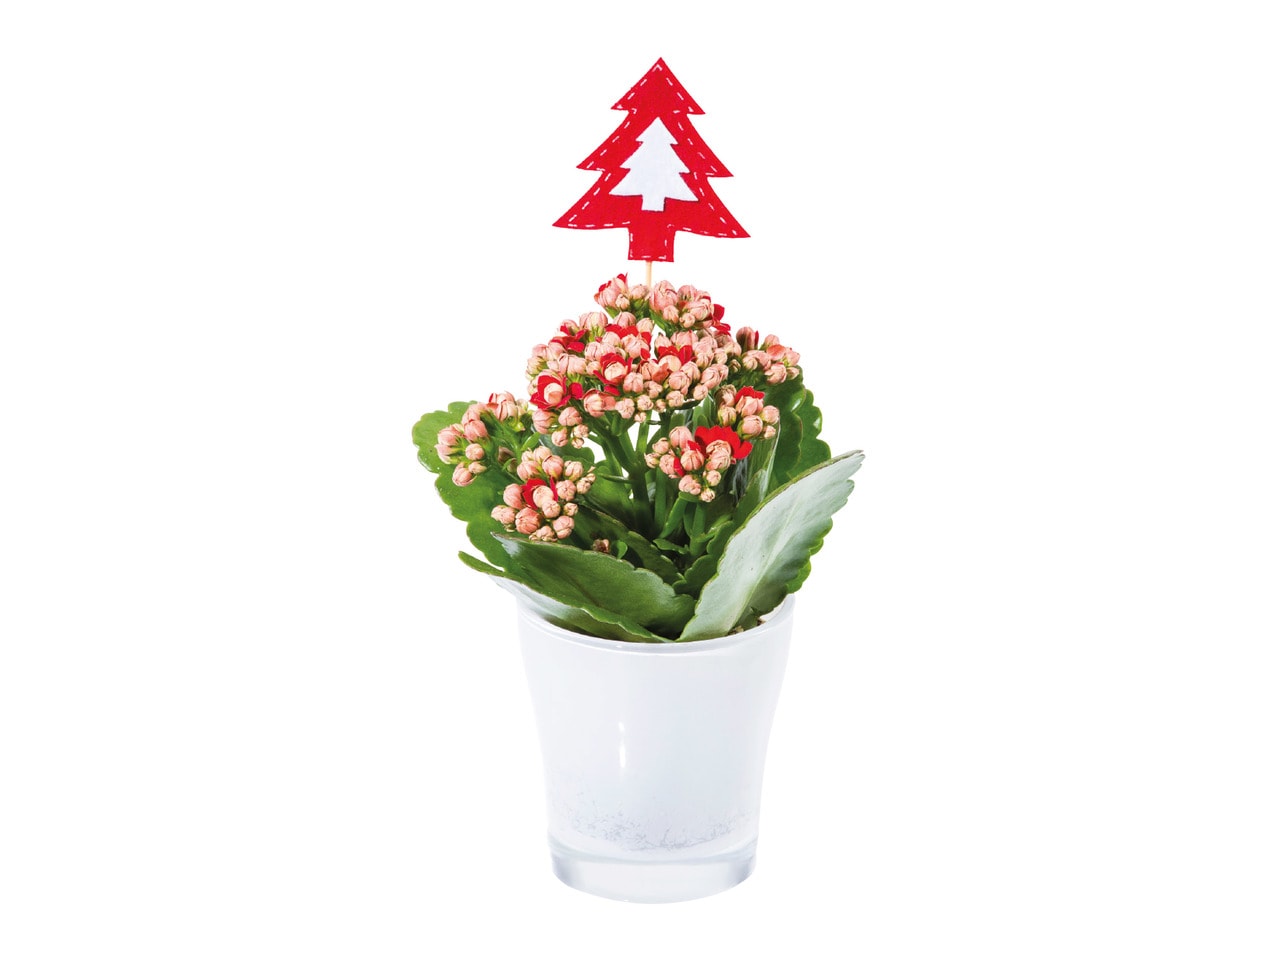 Kalanchoe in a Glass Pot1